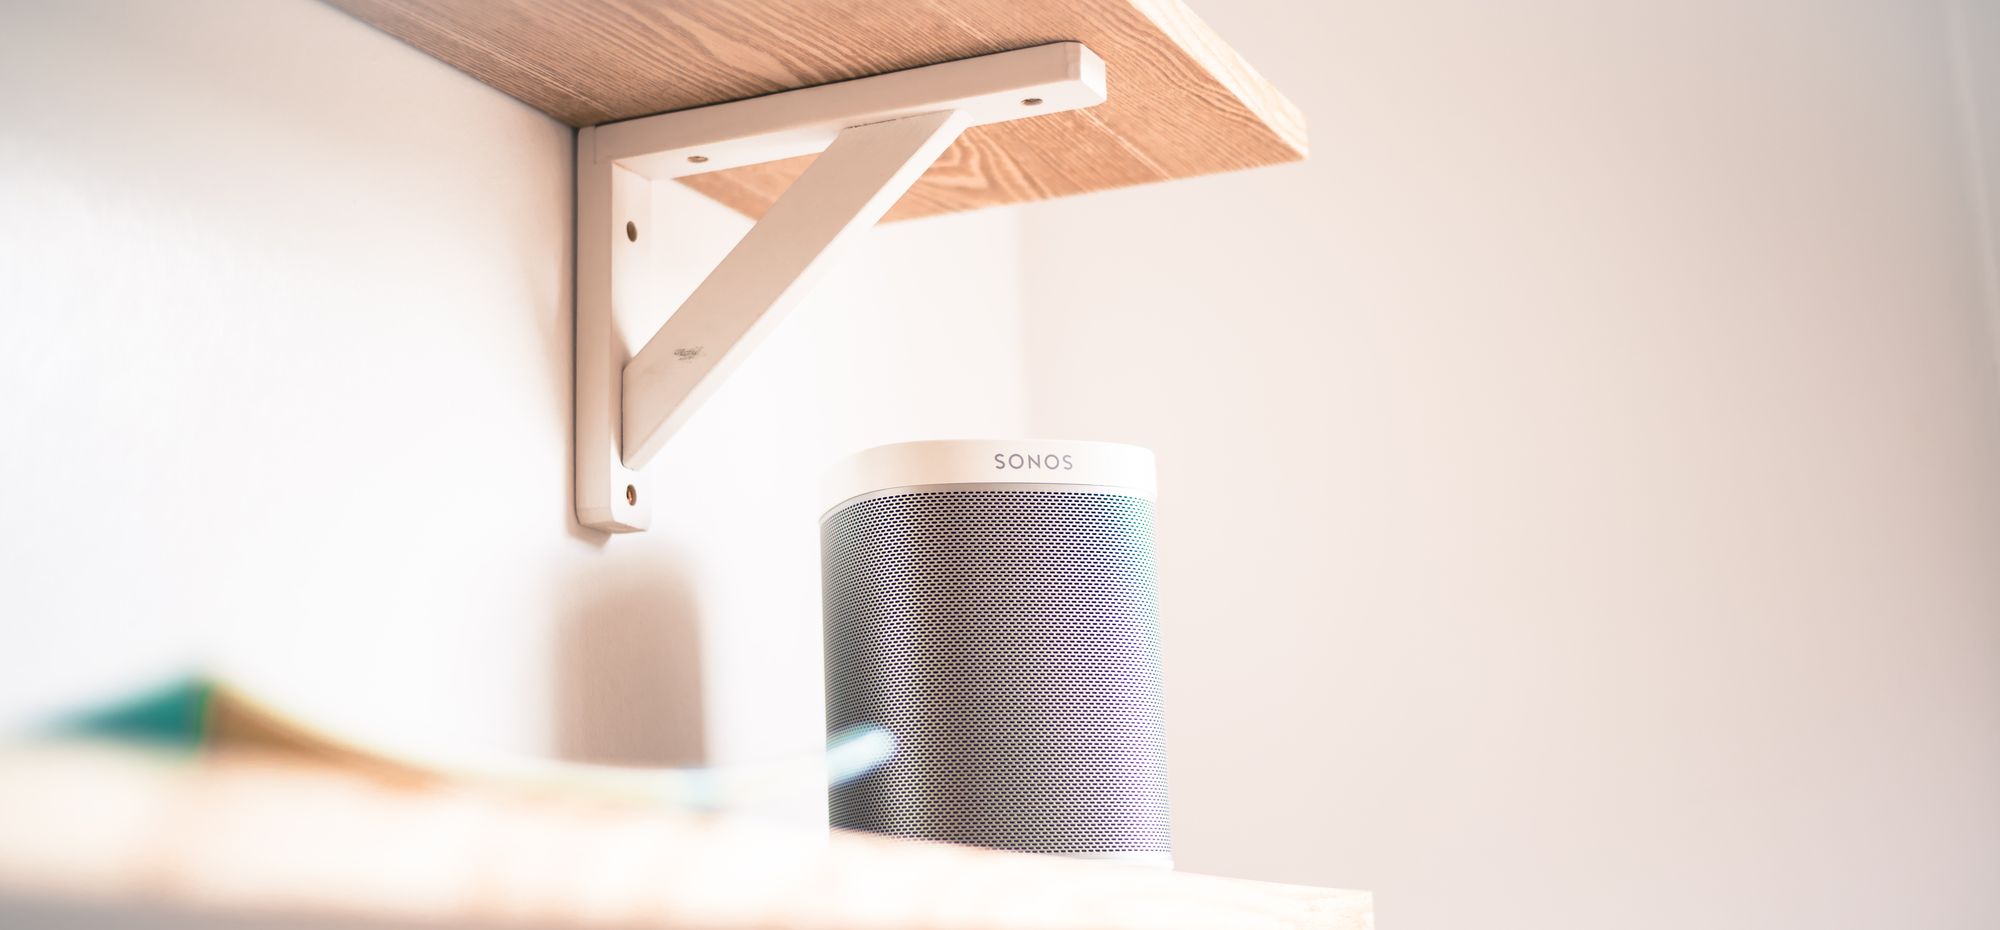 Rebooting all of your Sonos devices